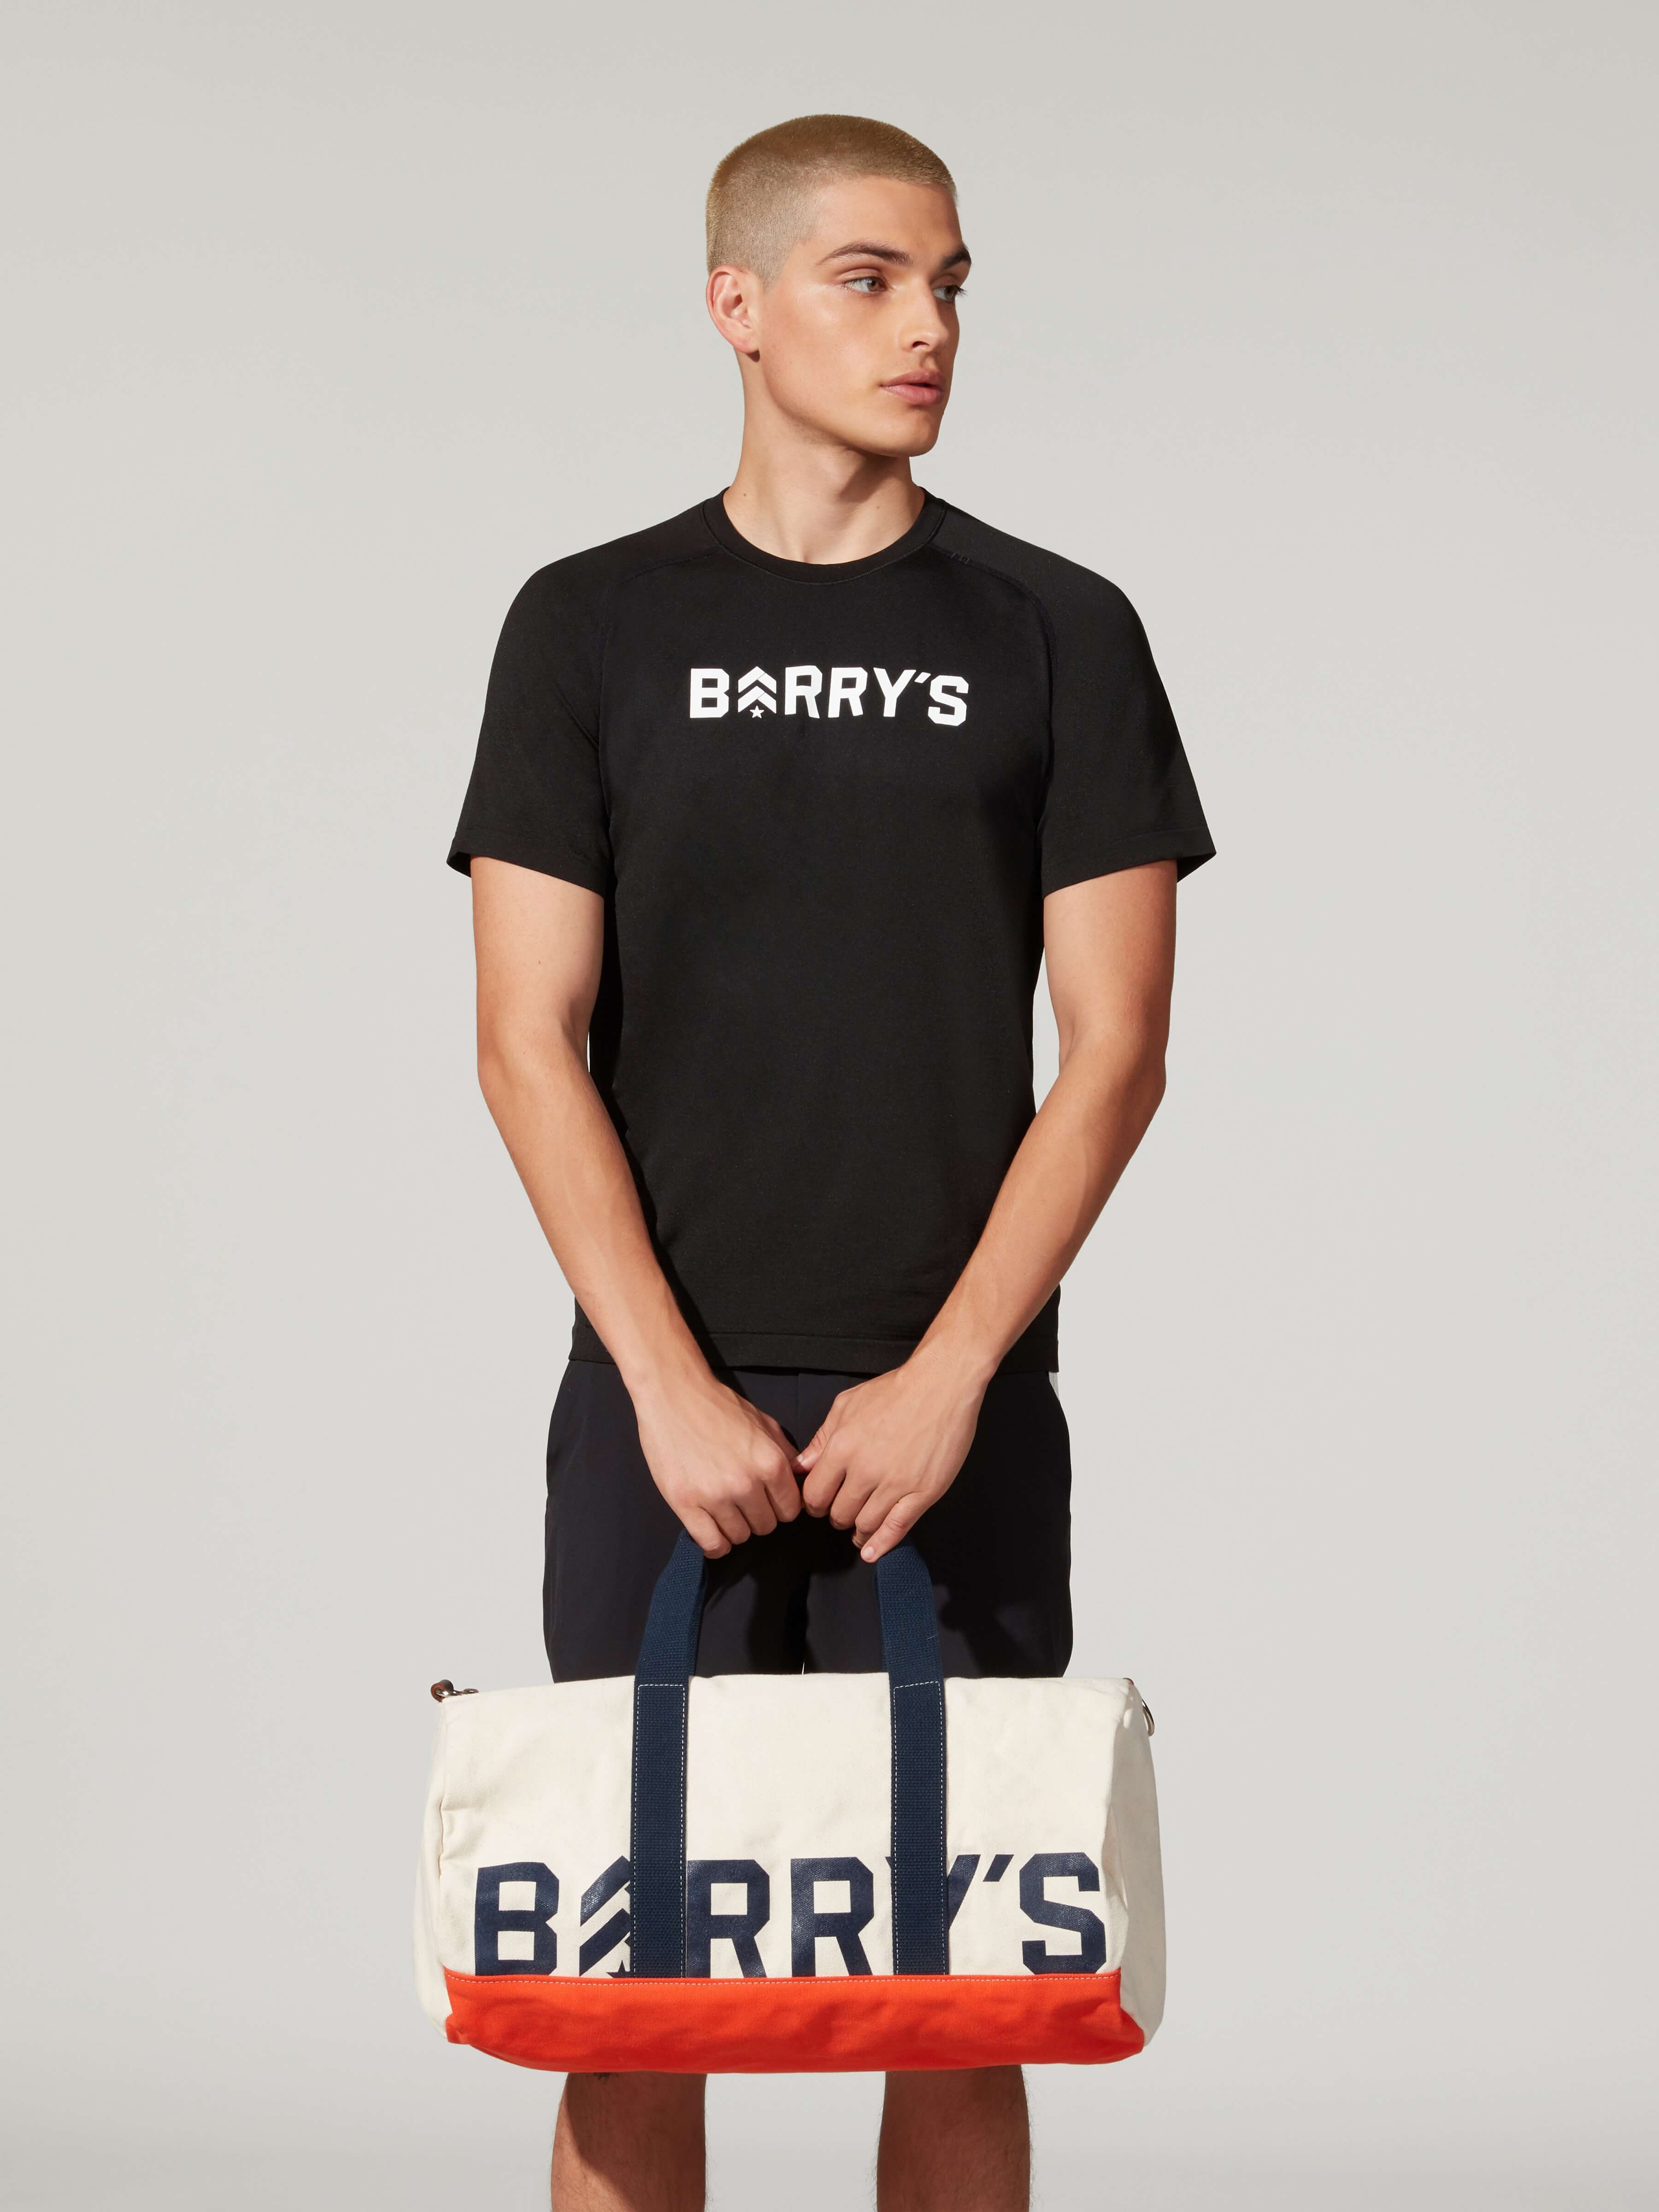 A male model with black Barry's tshirt , short and a Barry's bag